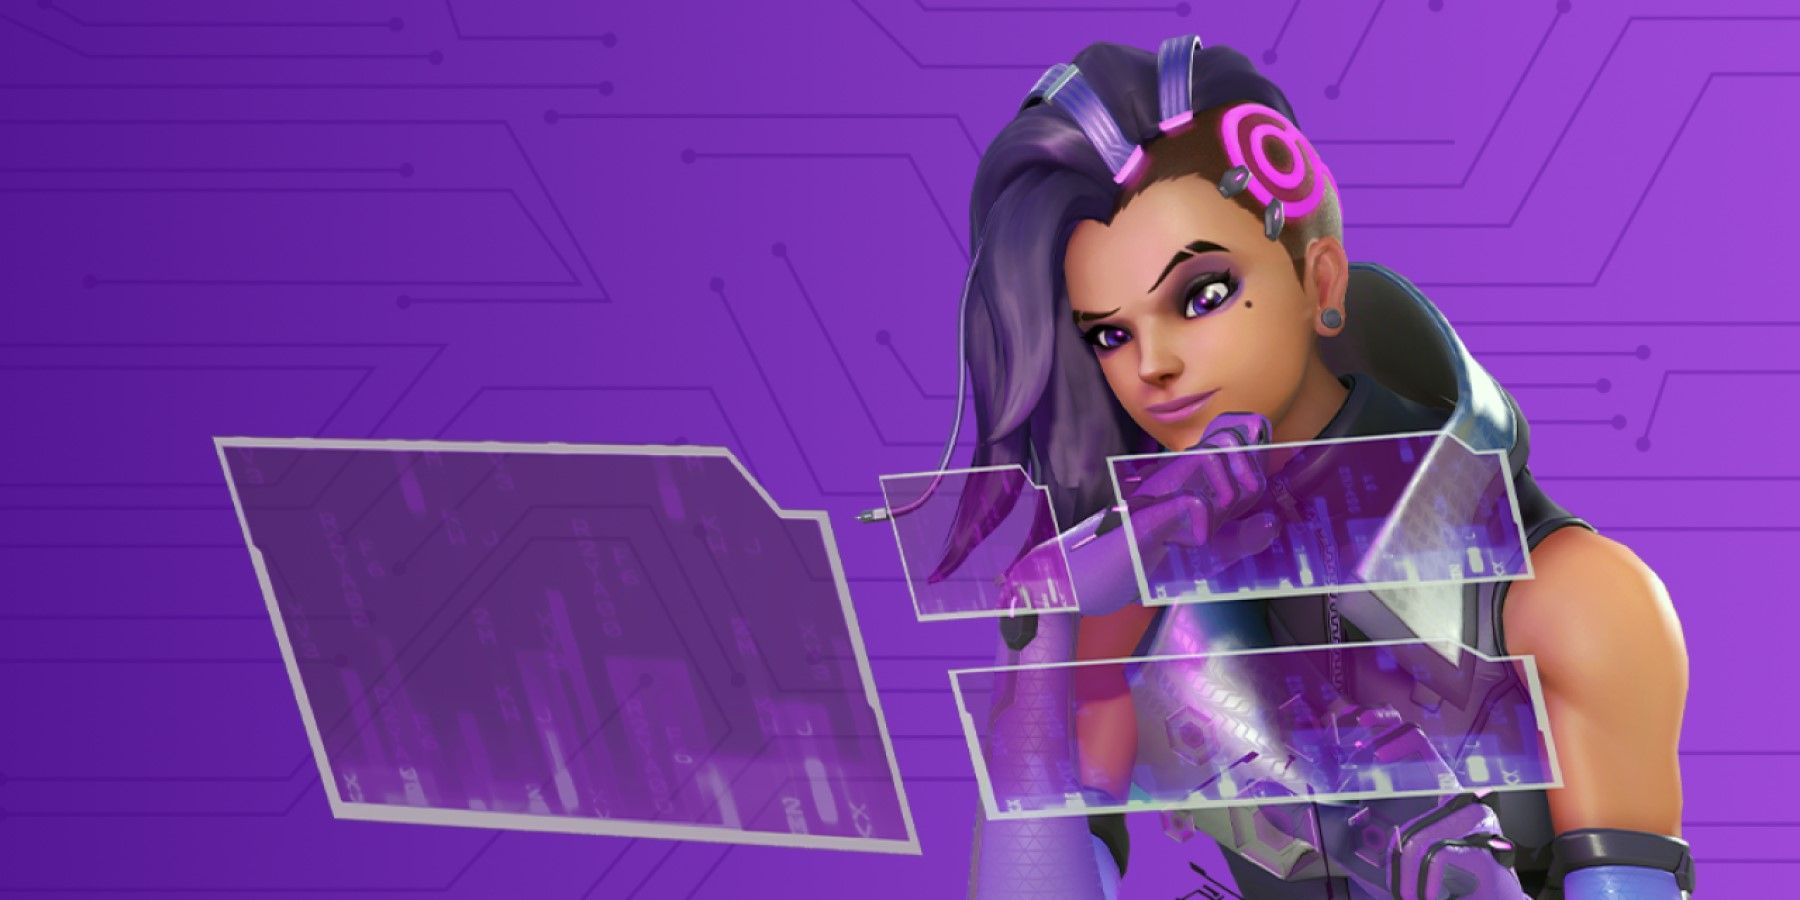 sombra from overwatch 2